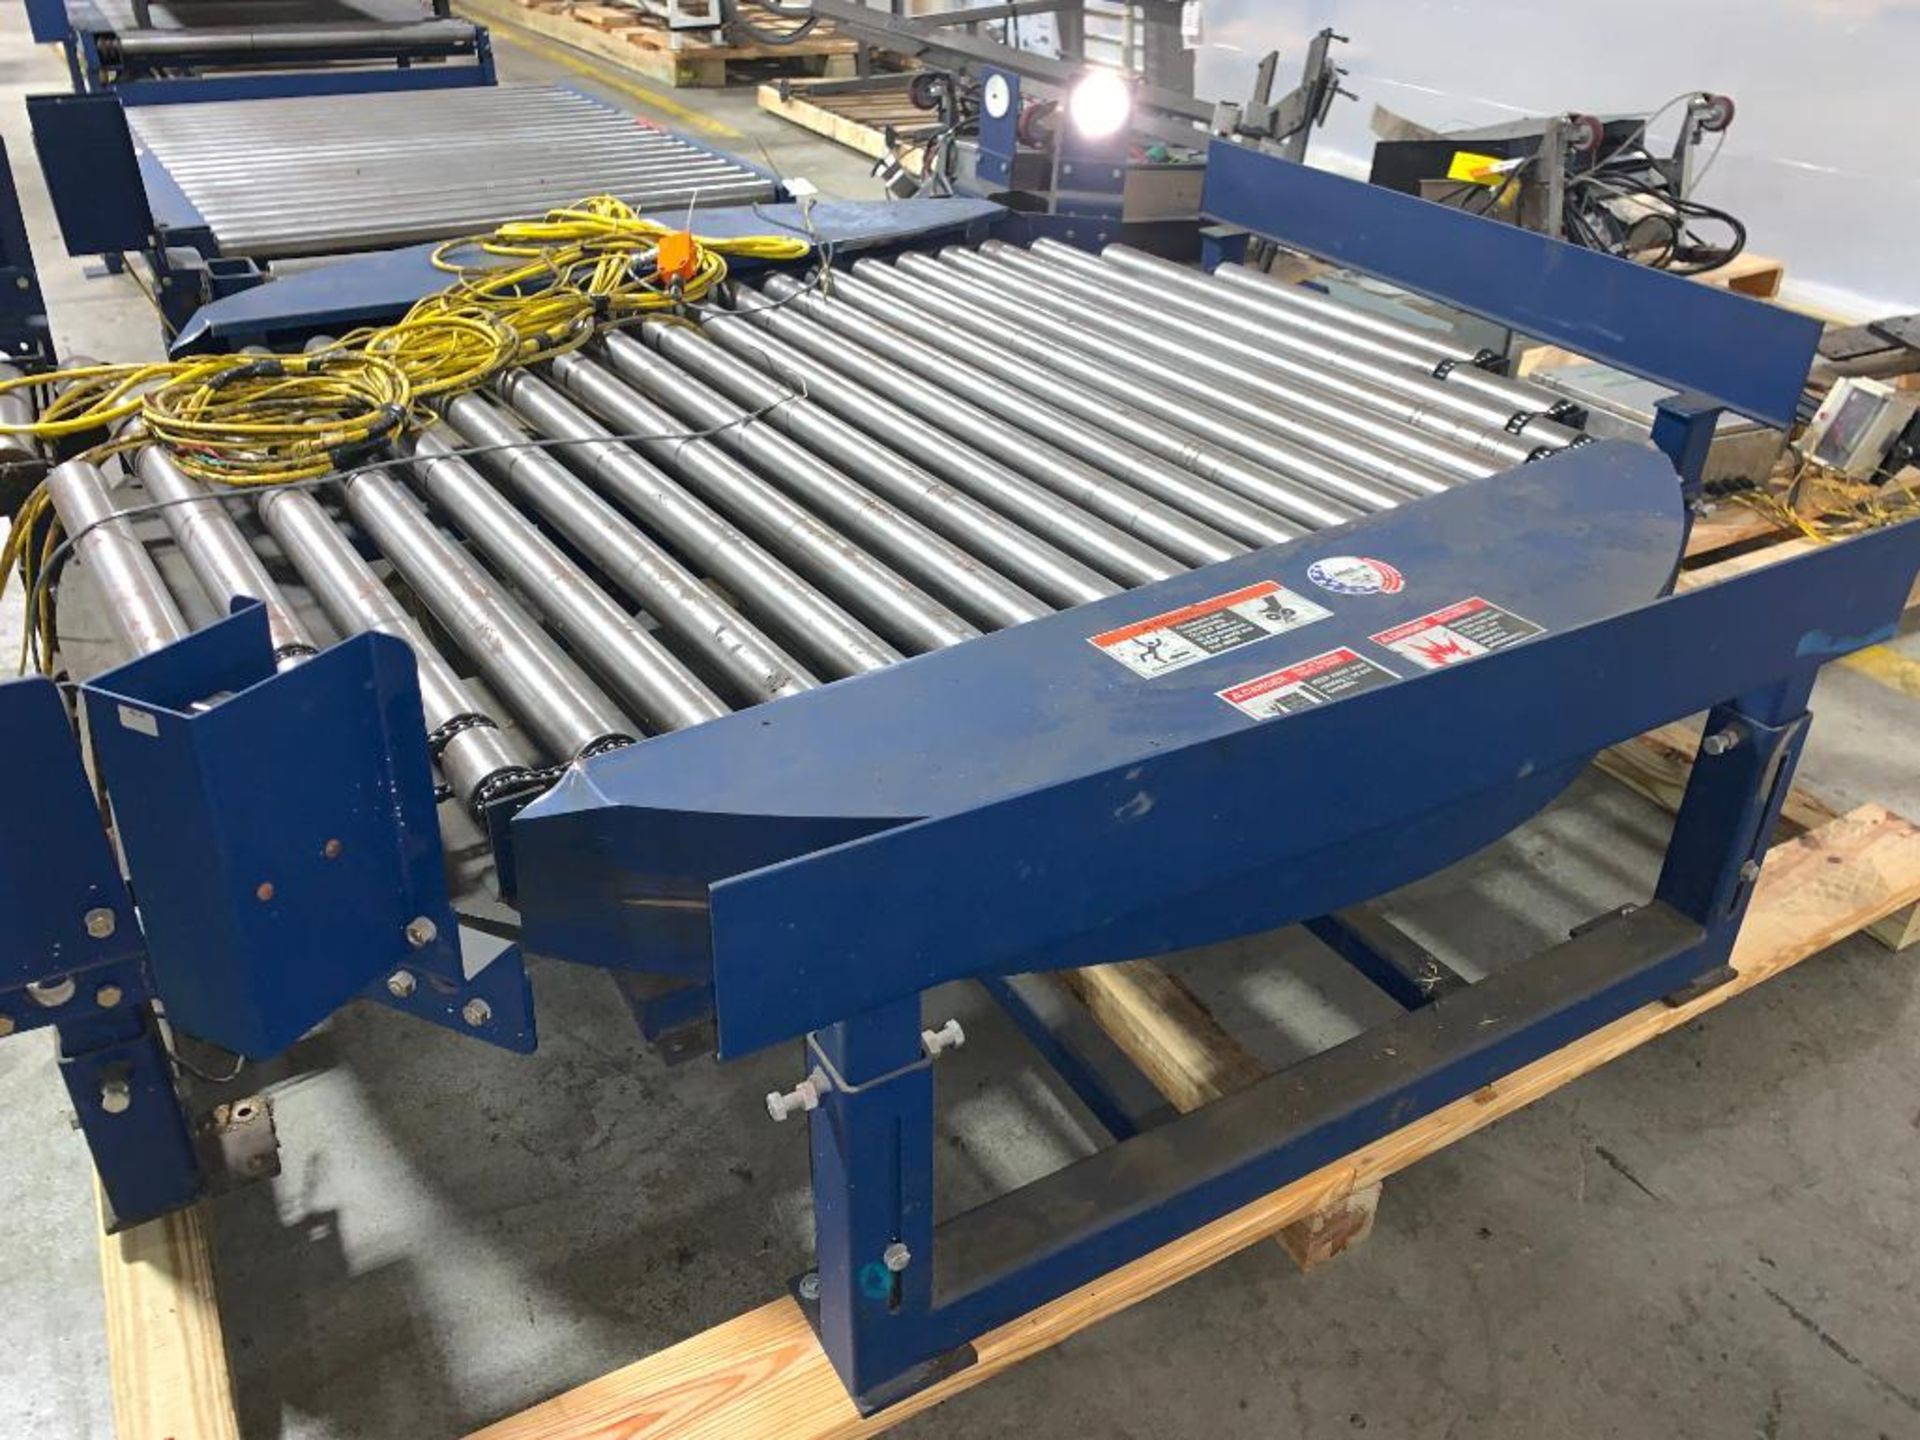 (6) skids of Lantech full pallet conveyor including turntable section - Located in Tifton, GA - Image 5 of 19